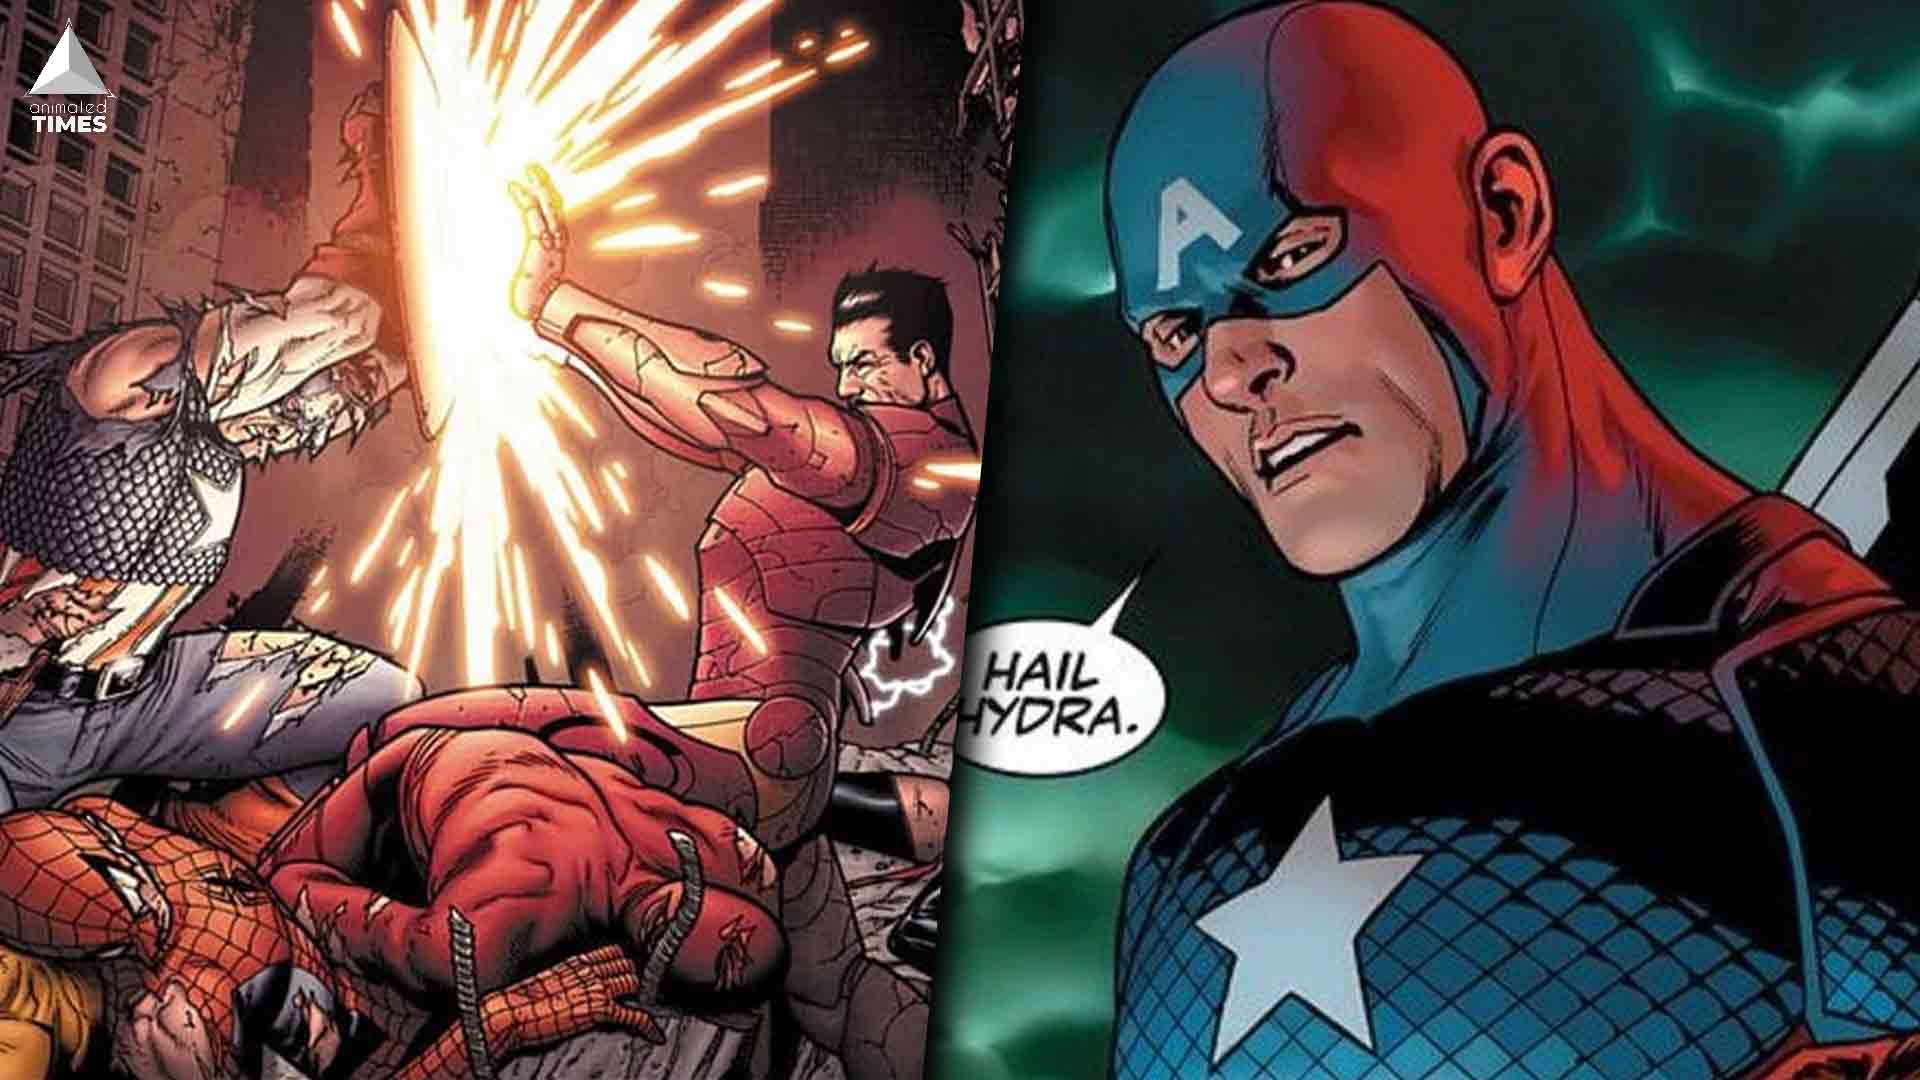 Not My Captain America: 10 Darkest Moments To Make You Hate The Super Soldier